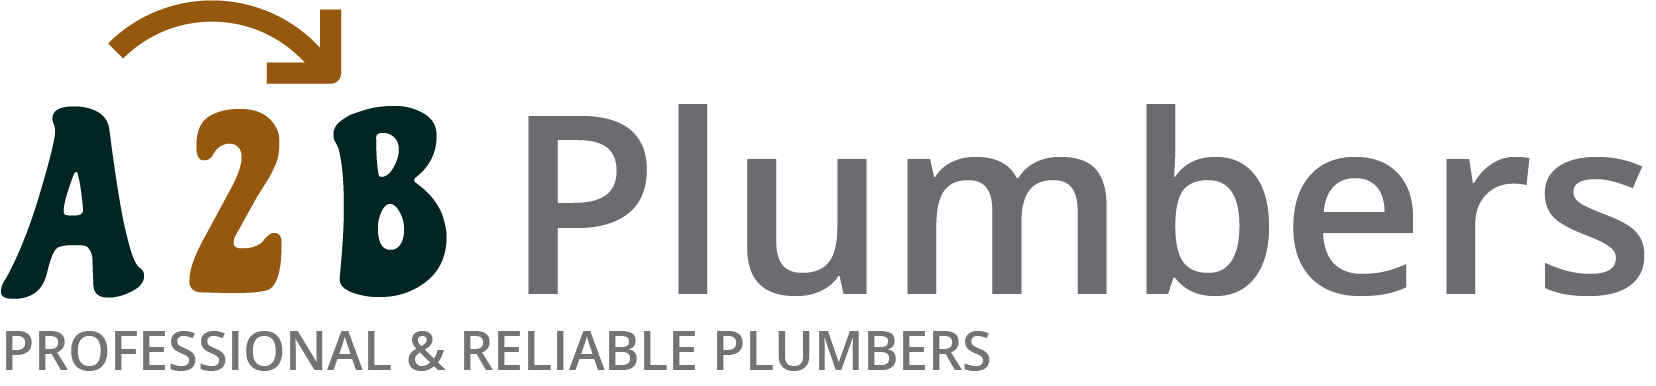 If you need a boiler installed, a radiator repaired or a leaking tap fixed, call us now - we provide services for properties in Churchdown and the local area.